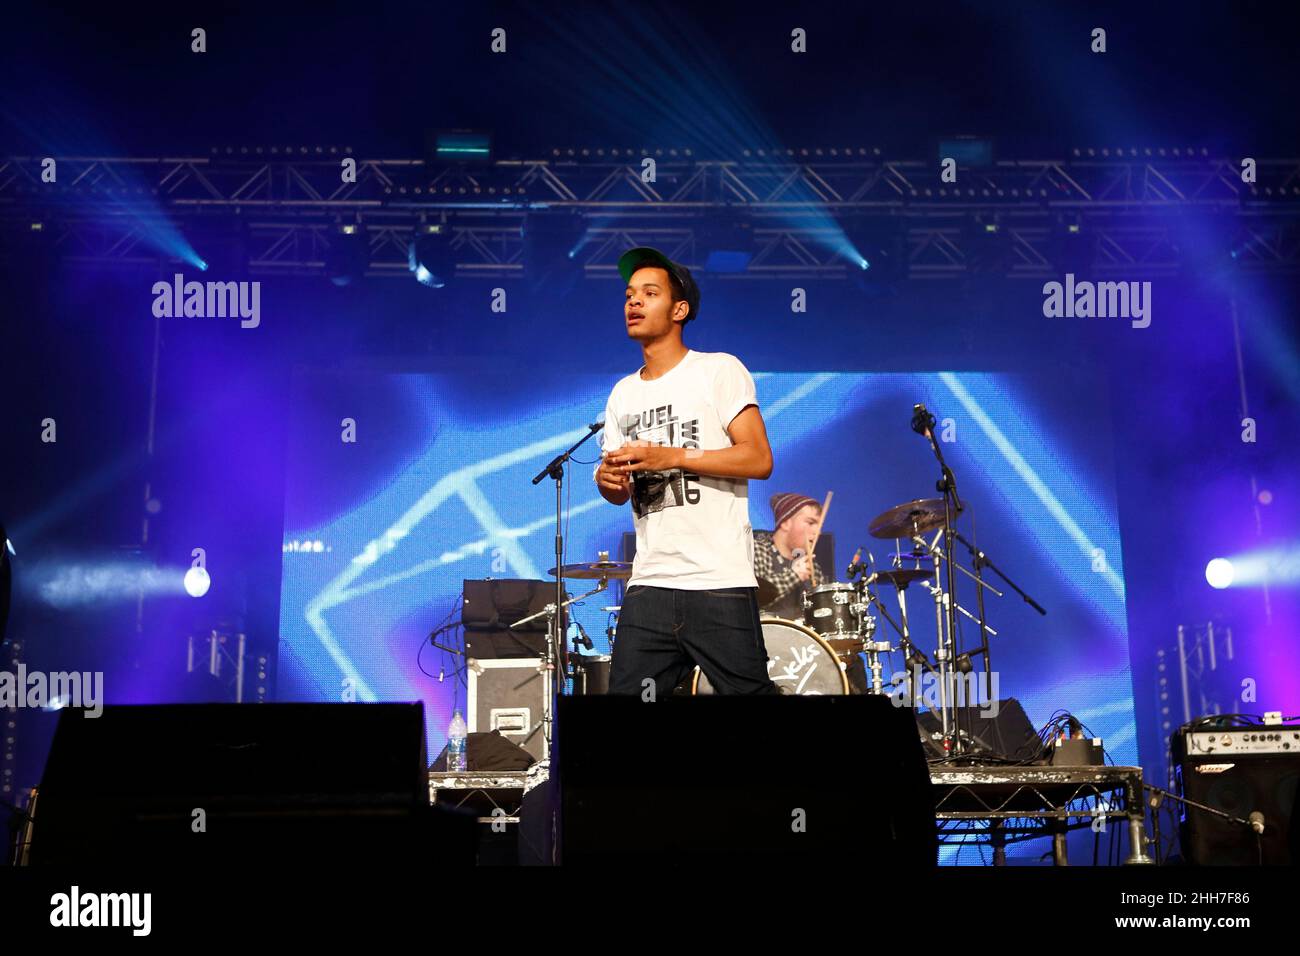 UK Entertainment - Relentless Freeze Festival, Rizzle Kicks Jordan 'Rizzle' Stephens, Harley 'Sylvester' Alexander-Sule British hip hop duo delight the crowd at the main stage at the annual Ski and Snowboard festival at Battersea Power Station, London. 28 October 2011. Photo Paul Cunningham Stock Photo